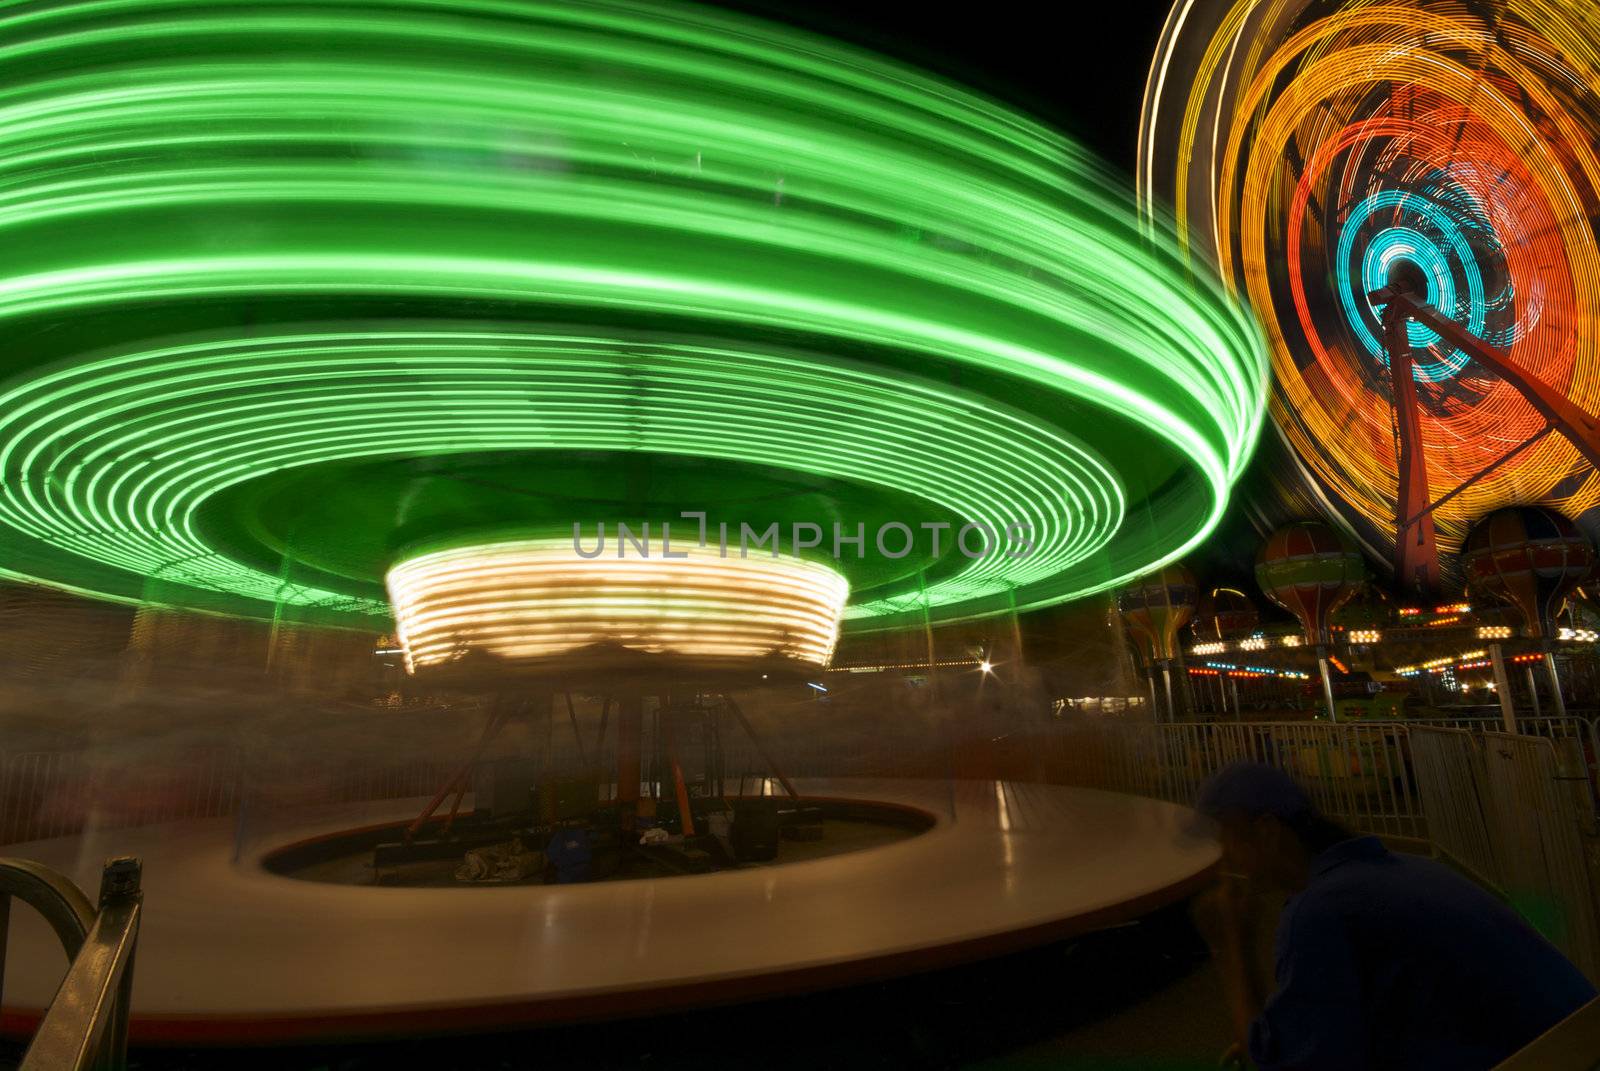 Two whirling carnival rides create magical and colorful rings of light in the night